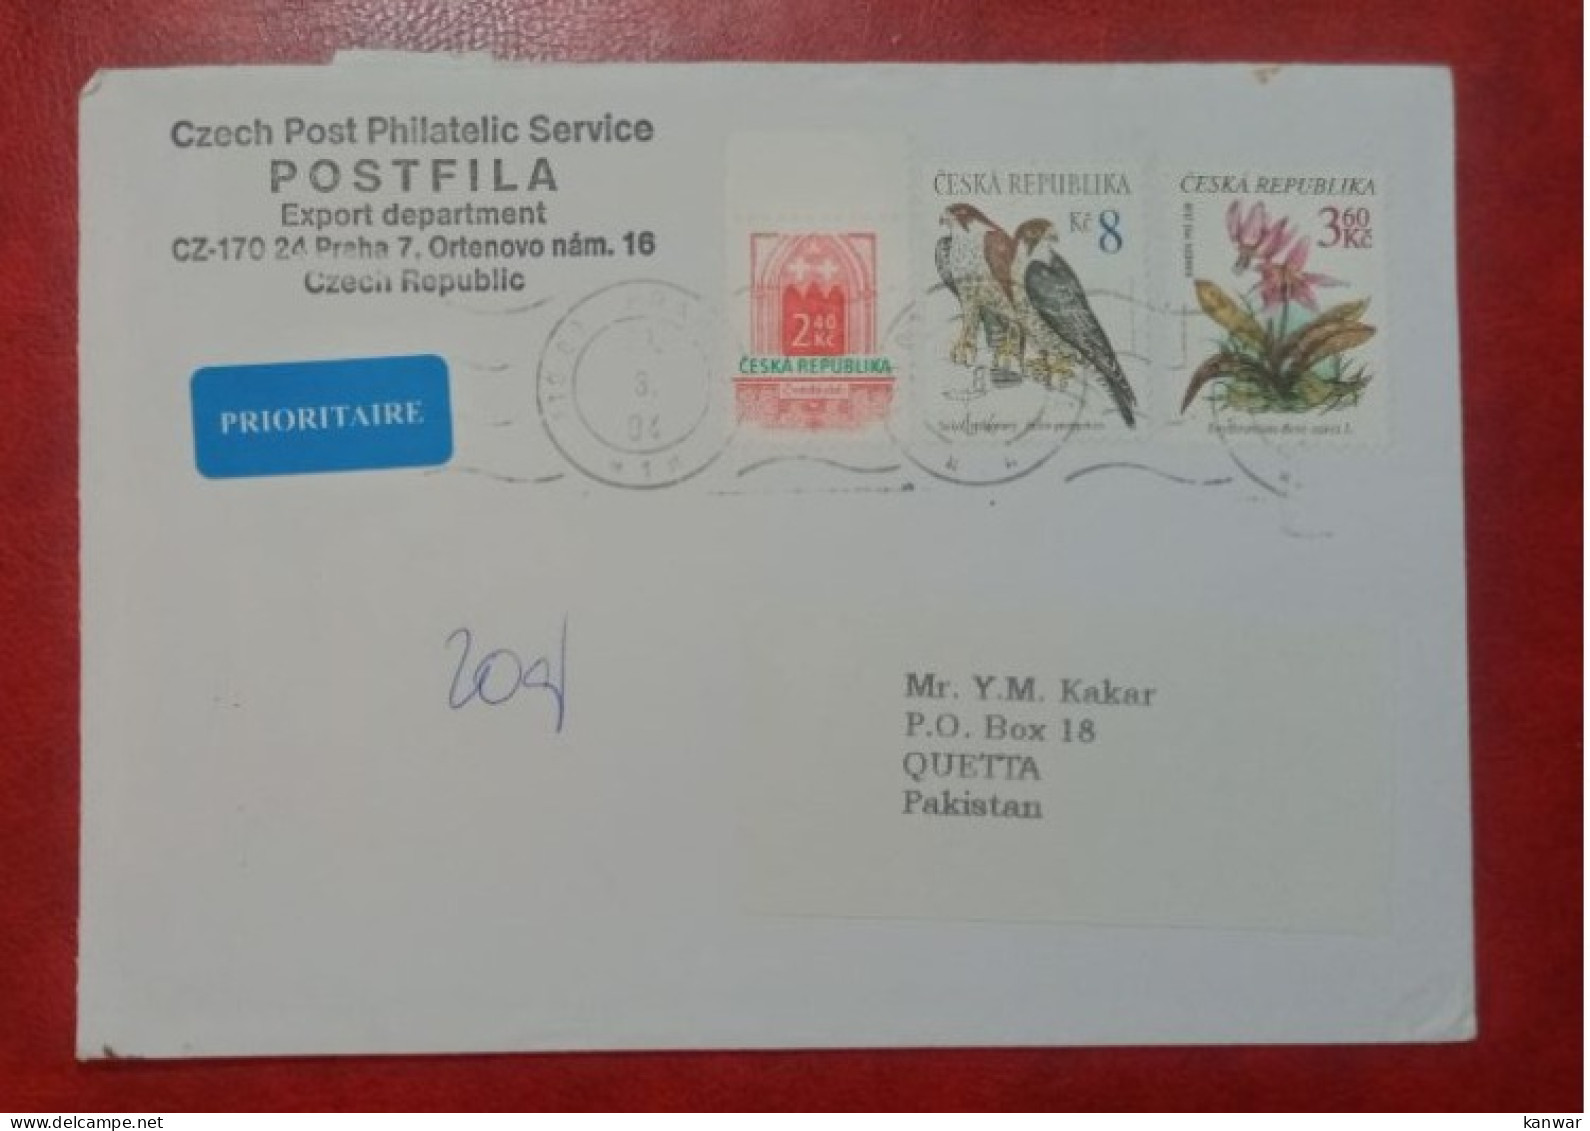 2004 CZECH REPUBLIC TO PAKISTAN USED COVER WITH STAMPS FLOWERS EAGLE BIRDS - Covers & Documents